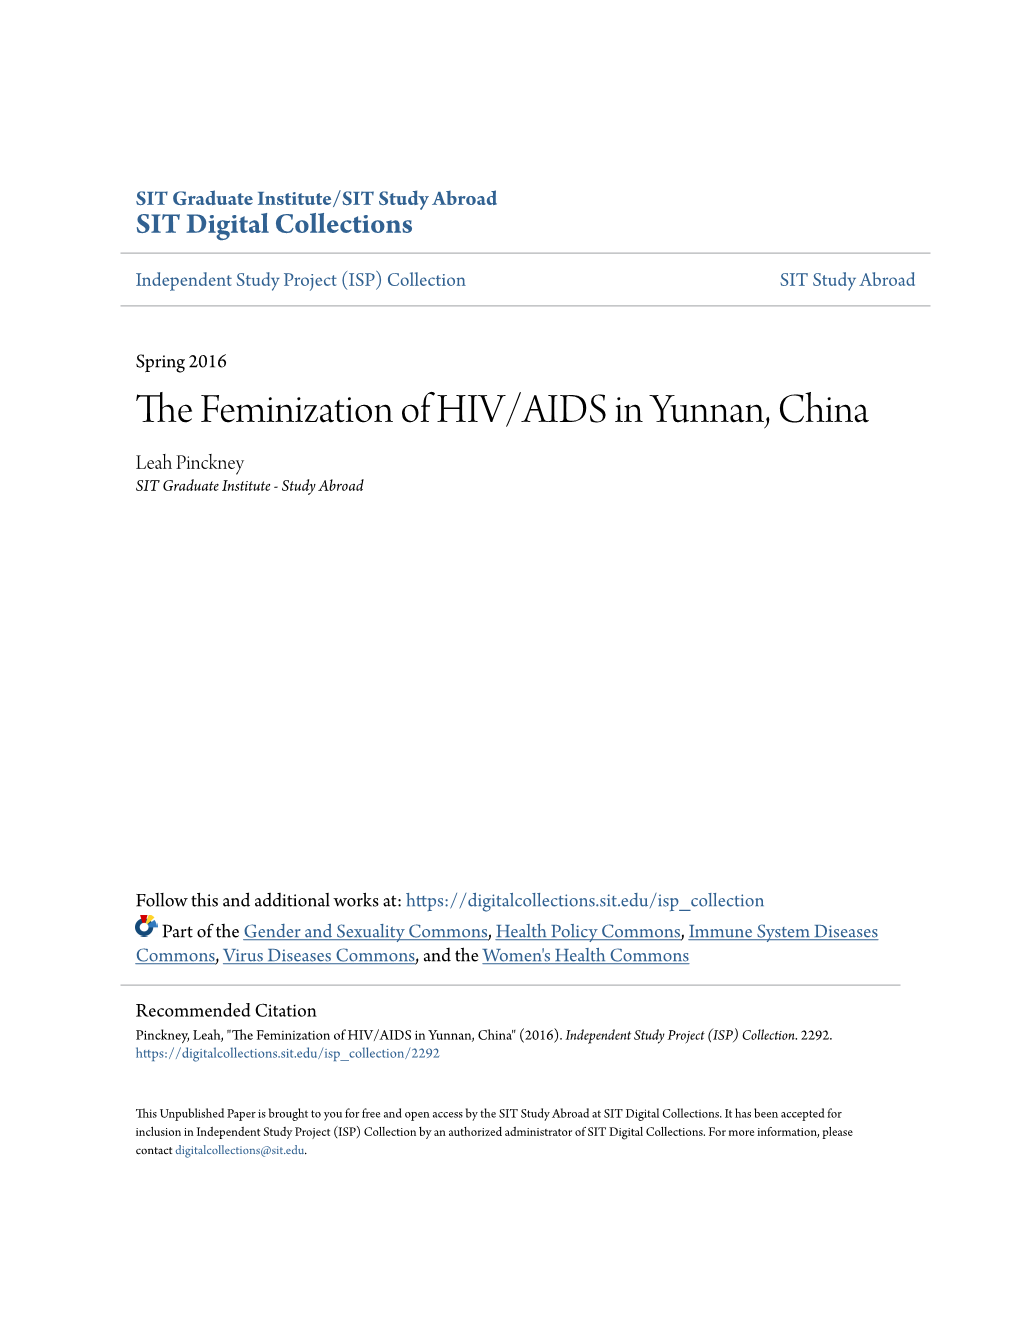 The Feminization of HIV/AIDS in Yunnan, China